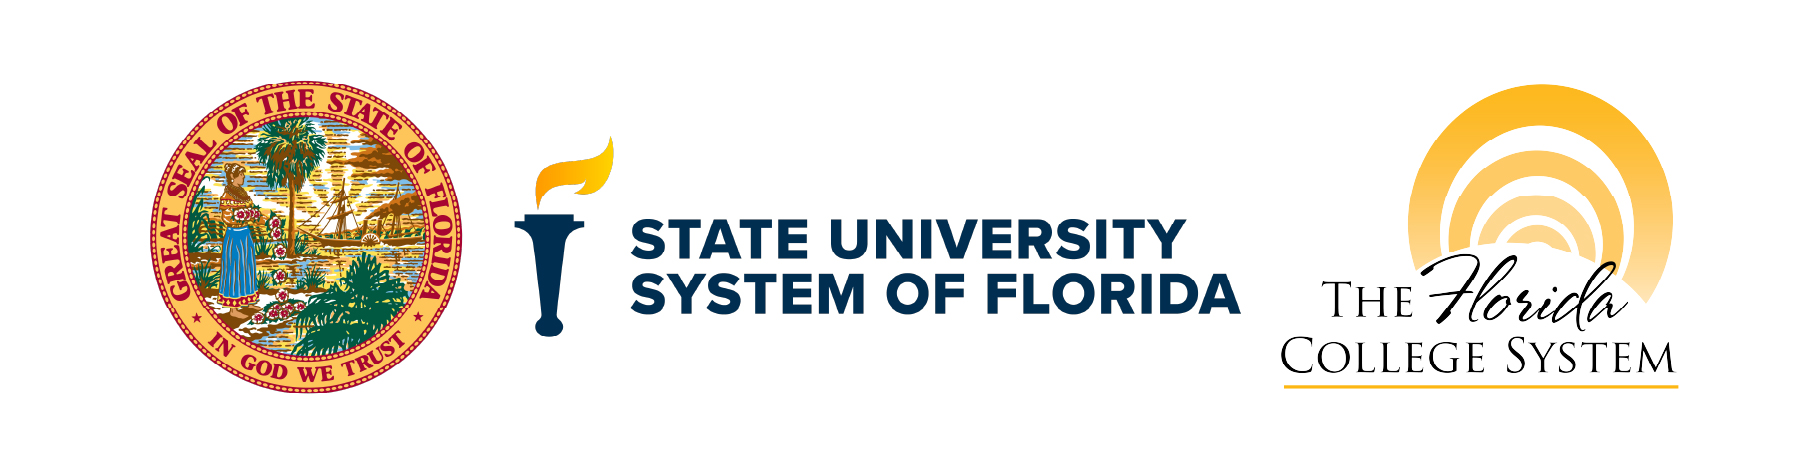 State University System logo, Florida State Seal, and the Florida College system logo